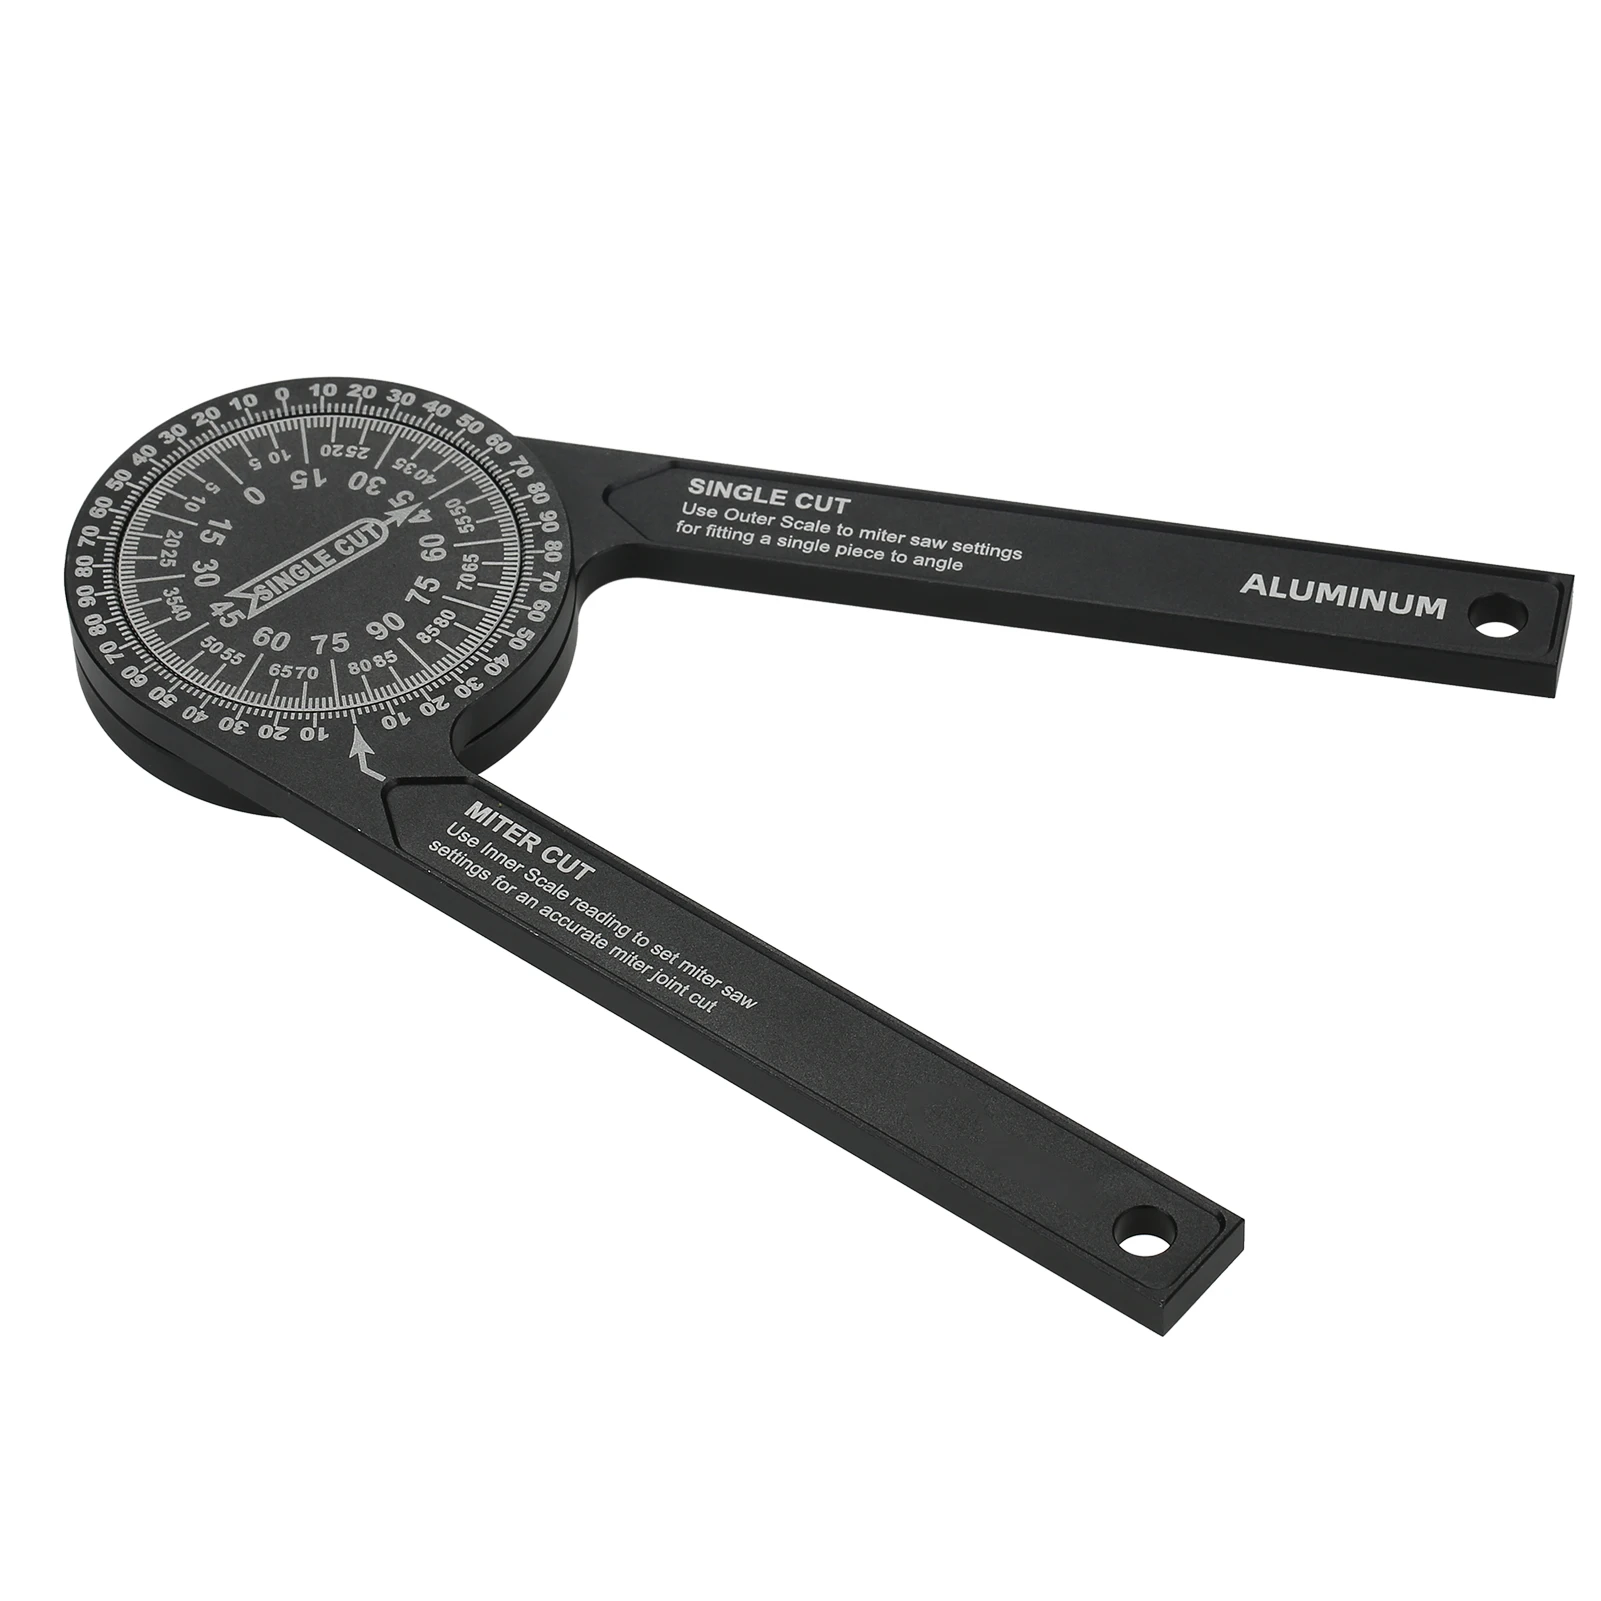 

7in Miter Saws Protractor Rust Proof Accurate Reading Scales Inside&Outside Miter Angle Finder for Carpenters Plumbers Building